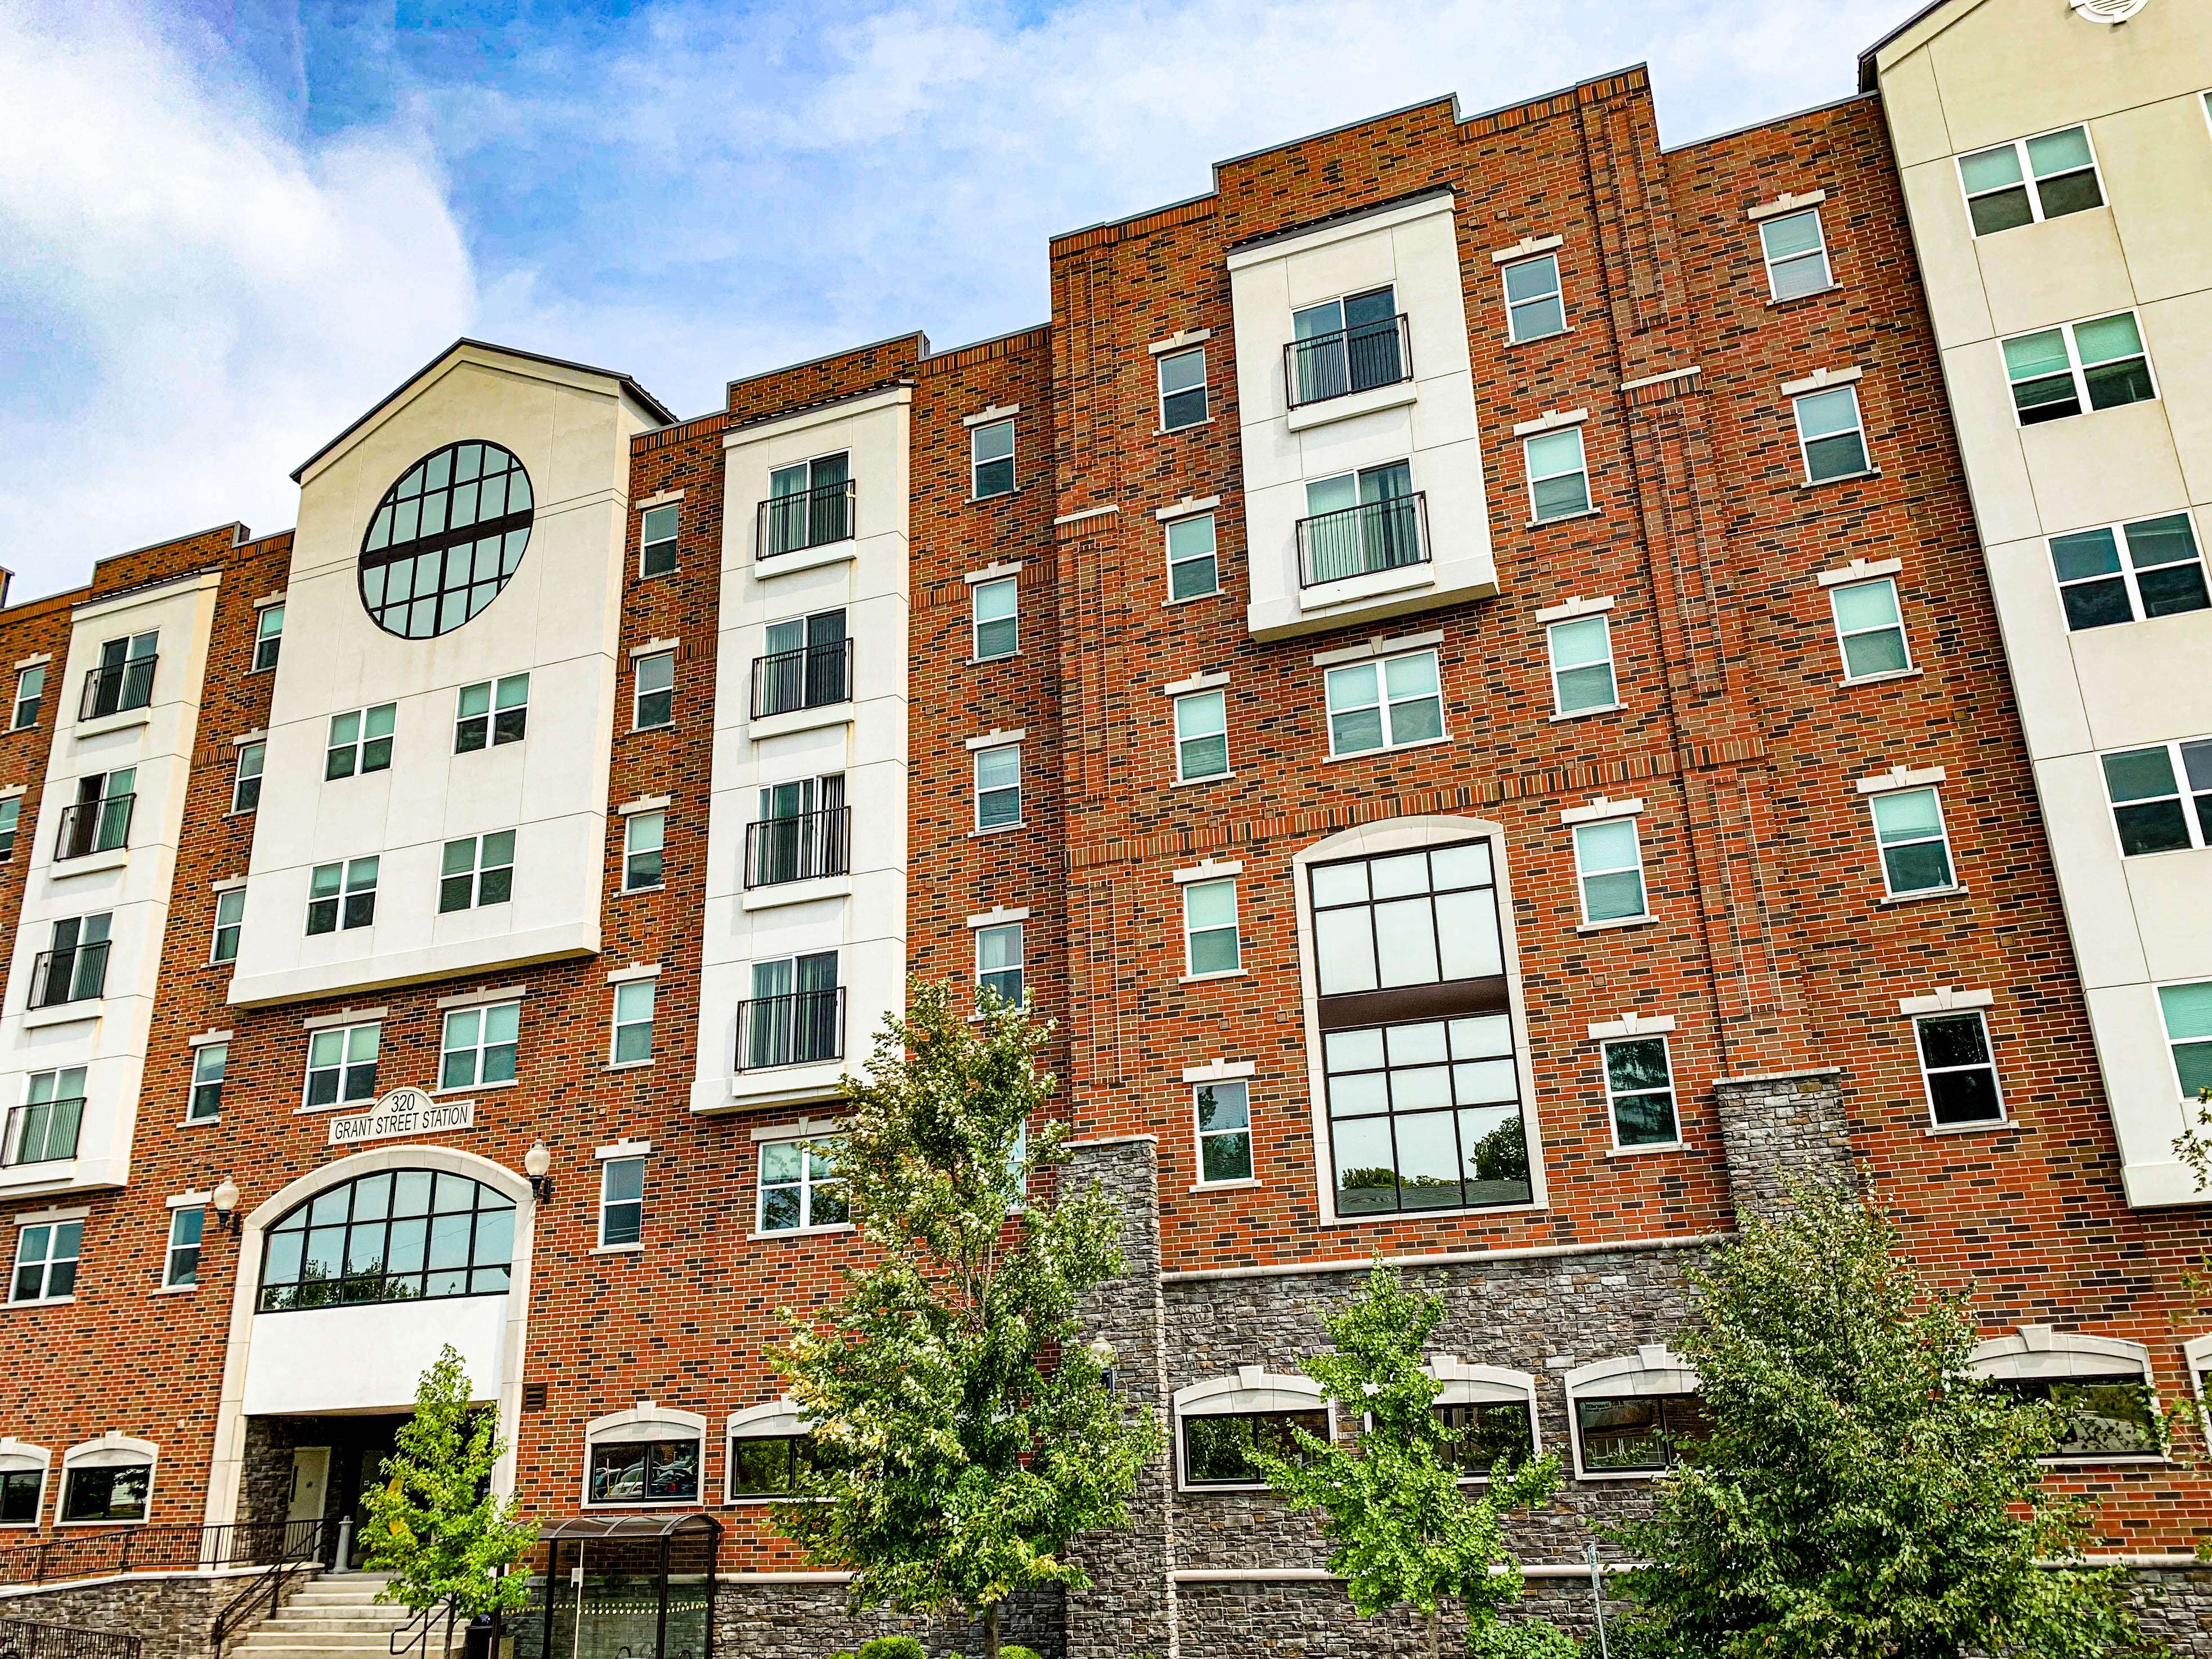 find-apartments/Grant-Street-Station/320-S.-Grant-Street-West-Lafayette/1340